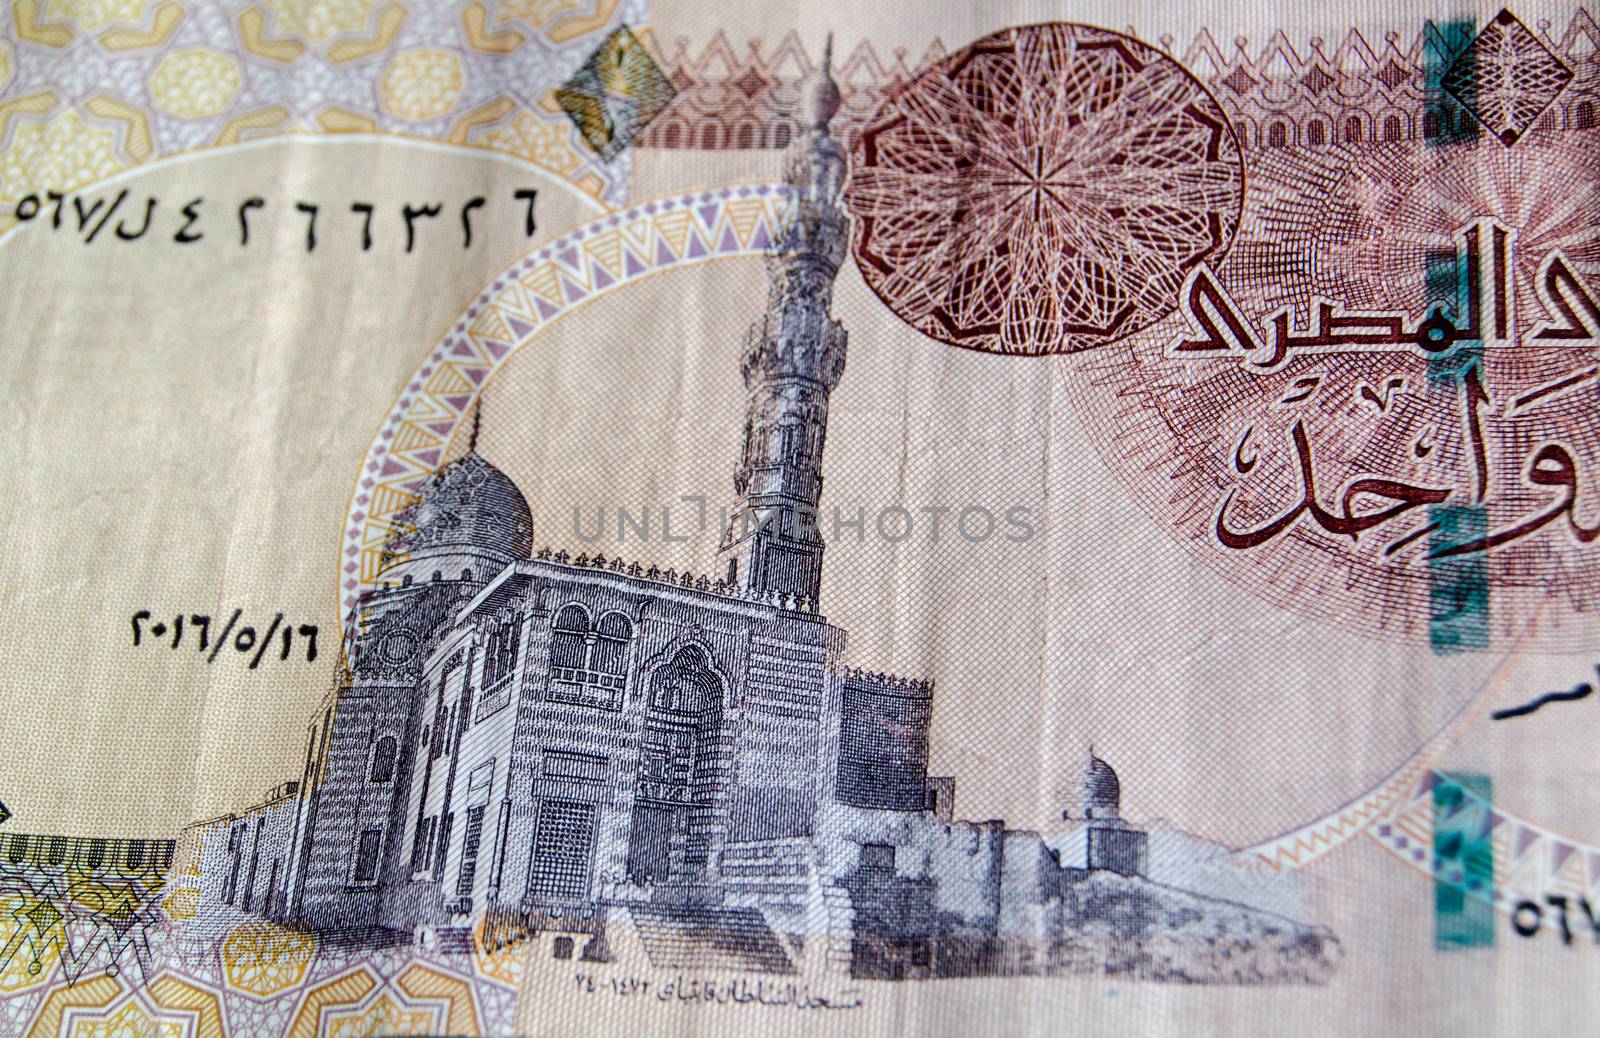 The mosque of Sultan Qait Bay in Cairo as depicted on the reverse of a one Egyptian pound banknote.  Used banknote, photographed at an angle.